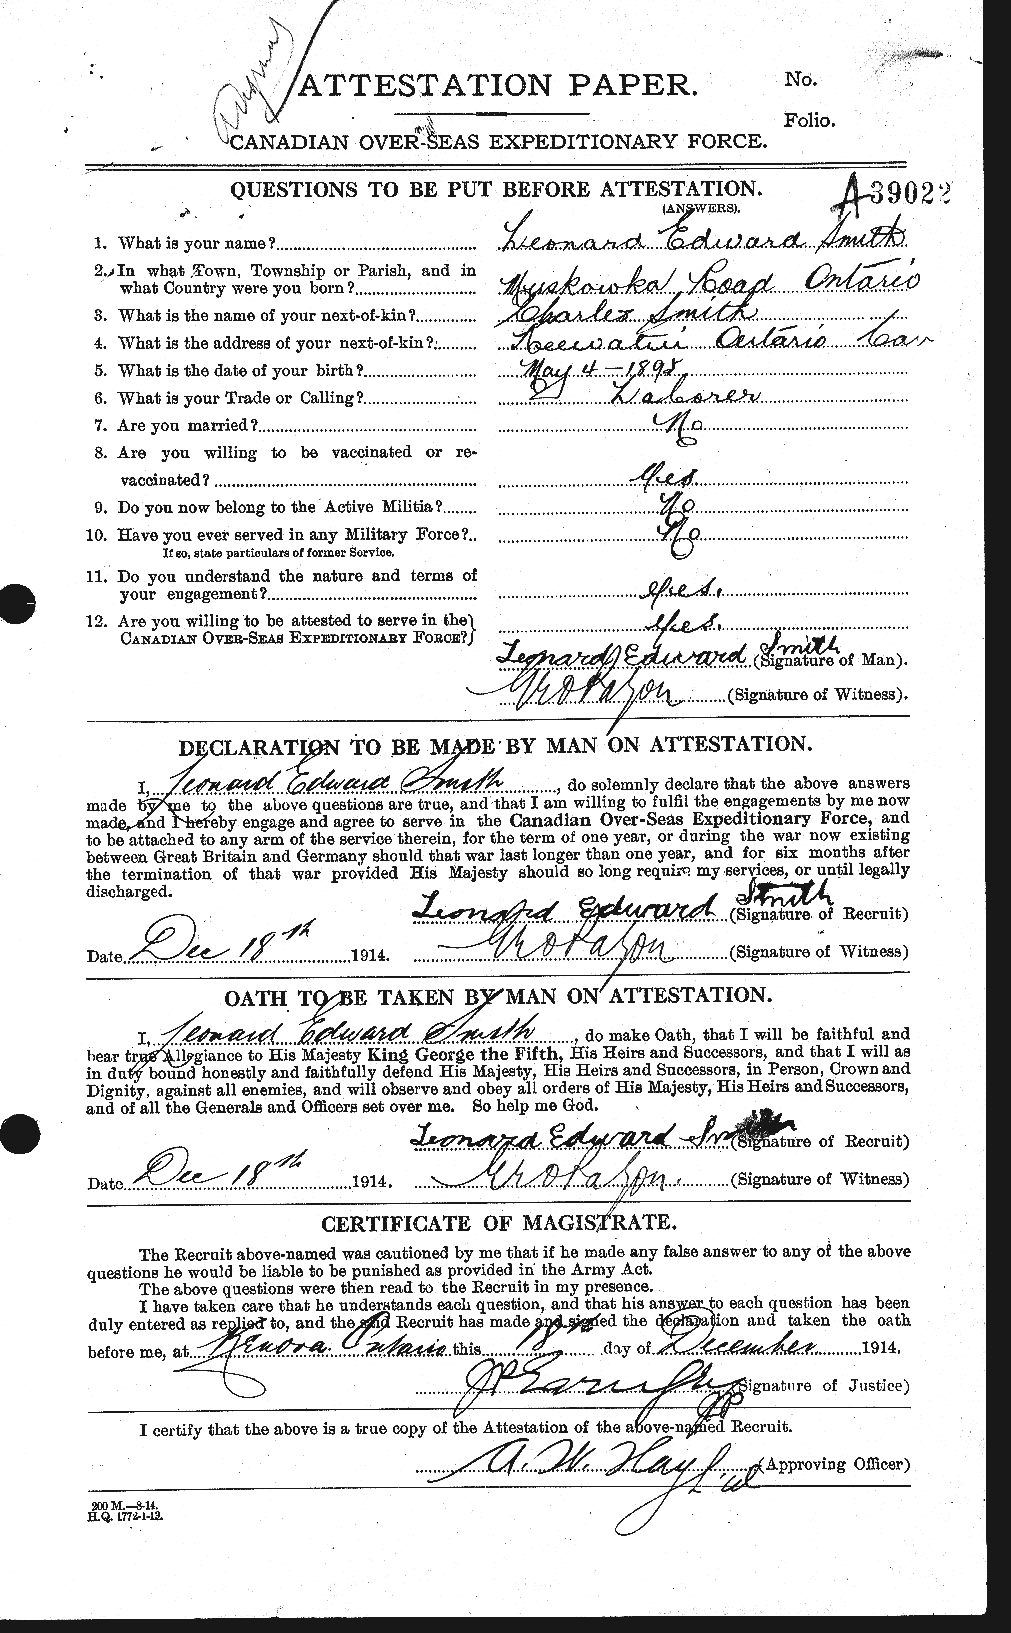 Personnel Records of the First World War - CEF 106280a